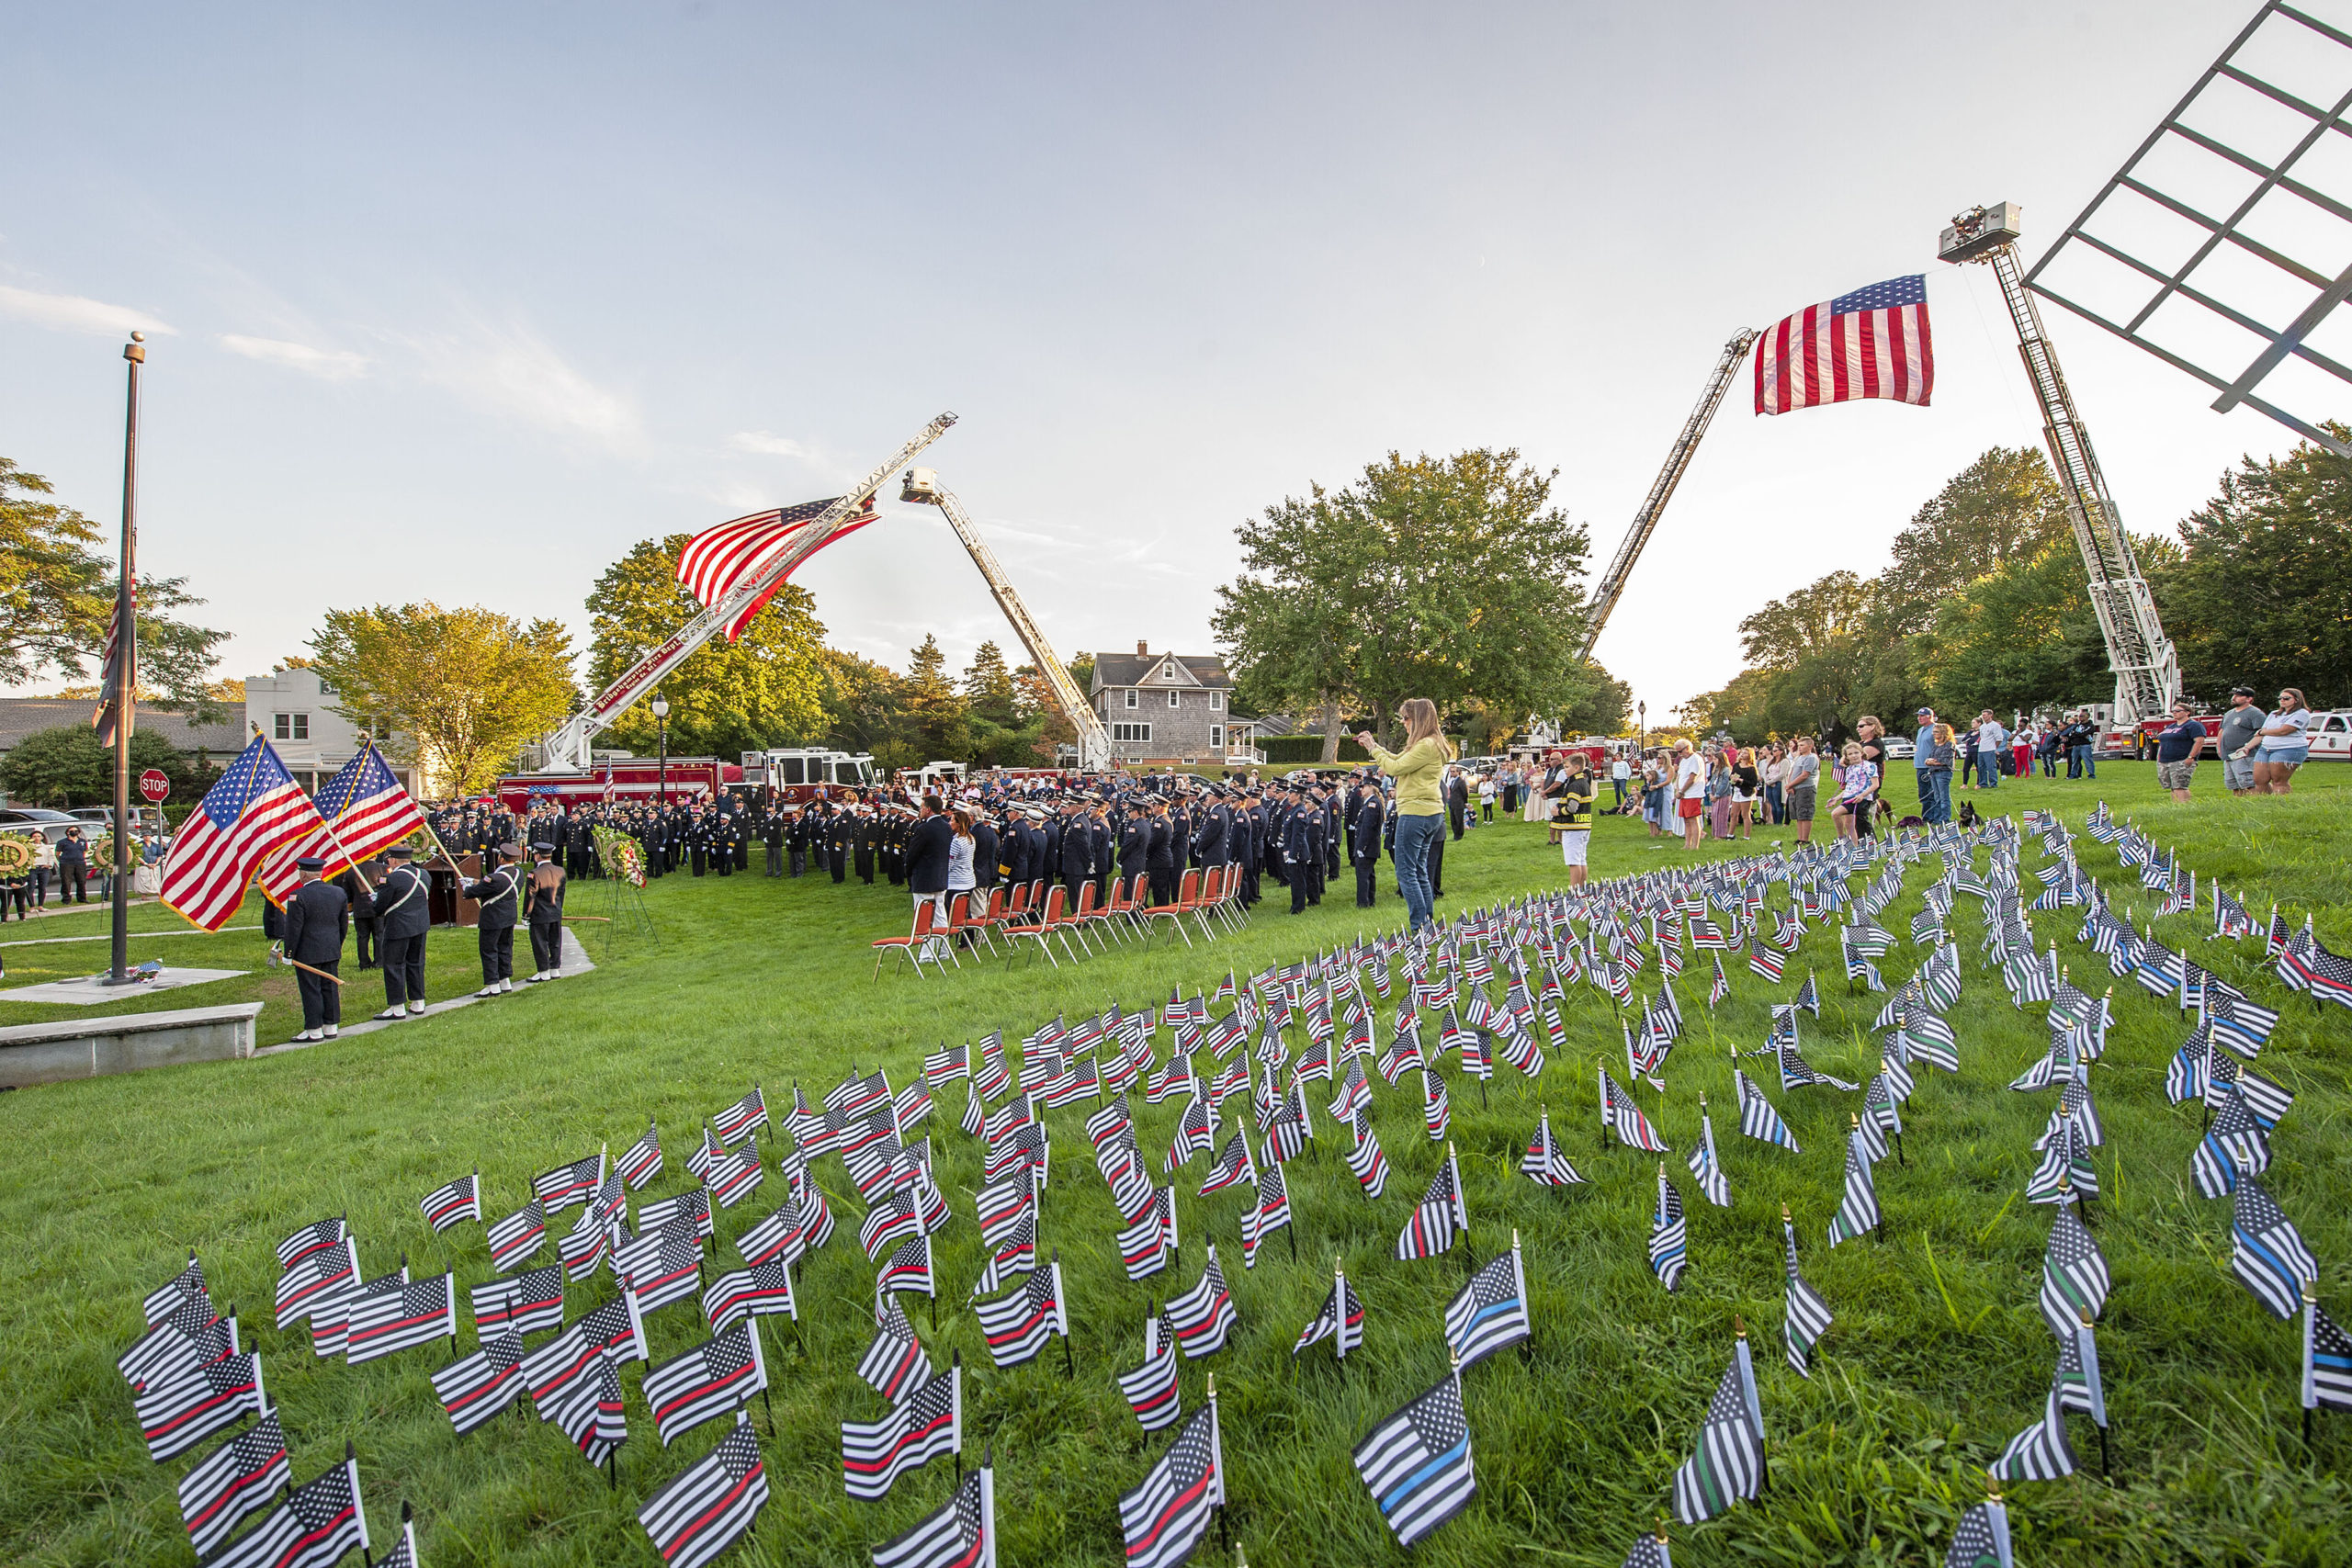 Individual flags for every member of the fire, police or military who died at 9/11 were  laid out during a ceremony commemorating the 20th anniversary of the attack on the World Trade Center, held on the Village Green in East Hampton and attended by 11 different East End fire, police and EMS agencies on Saturday afternoon.